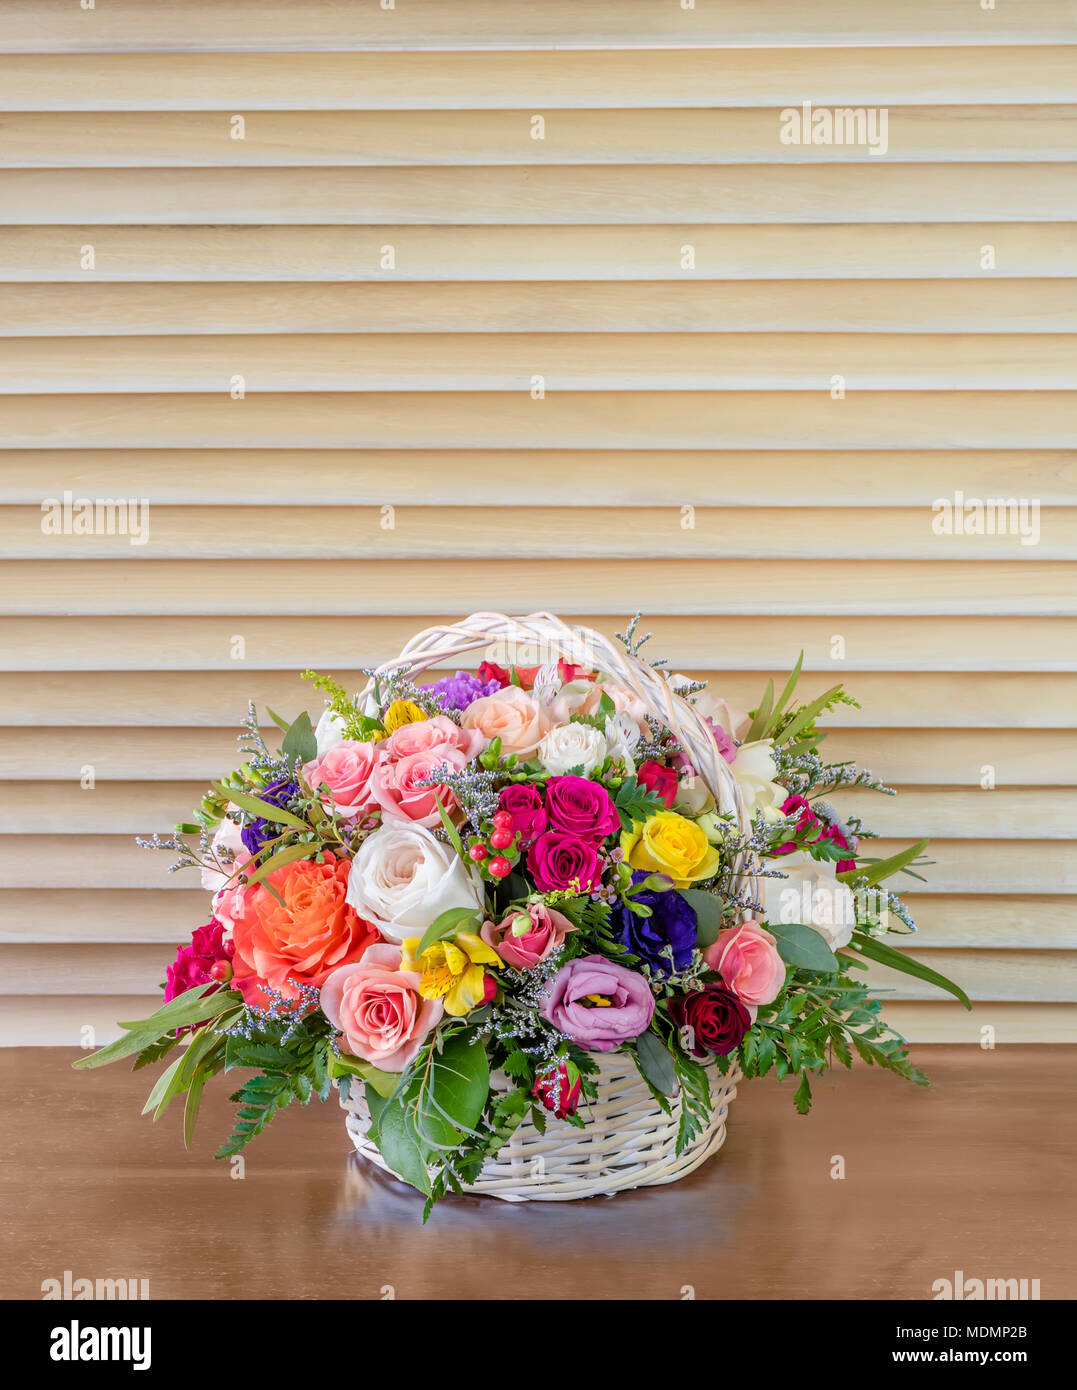 beautiful bouquet of flowers, colorful roses with green leaves standing in a wicker basket on a brown table, light wooden blinds in the background, re Stock Photo